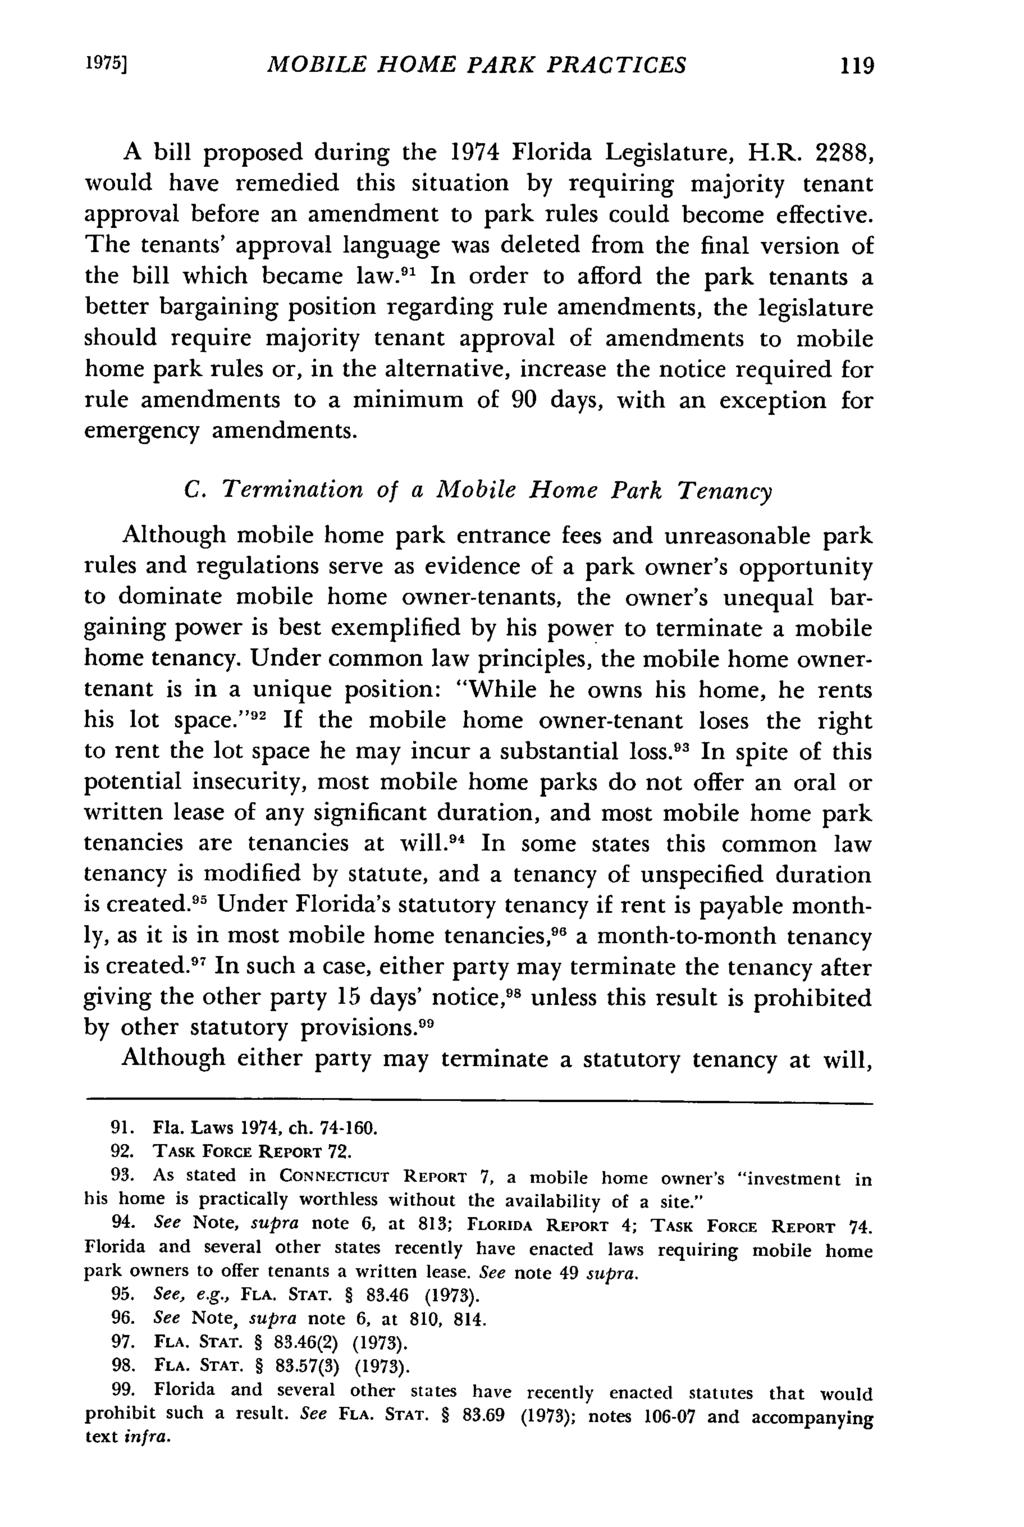 1975] MOBILE HOME PARK PRACTICES A bill proposed during the 1974 Florida Legislature, H.R. 2288, would have remedied this situation by requiring majority tenant approval before an amendment to park rules could become effective.